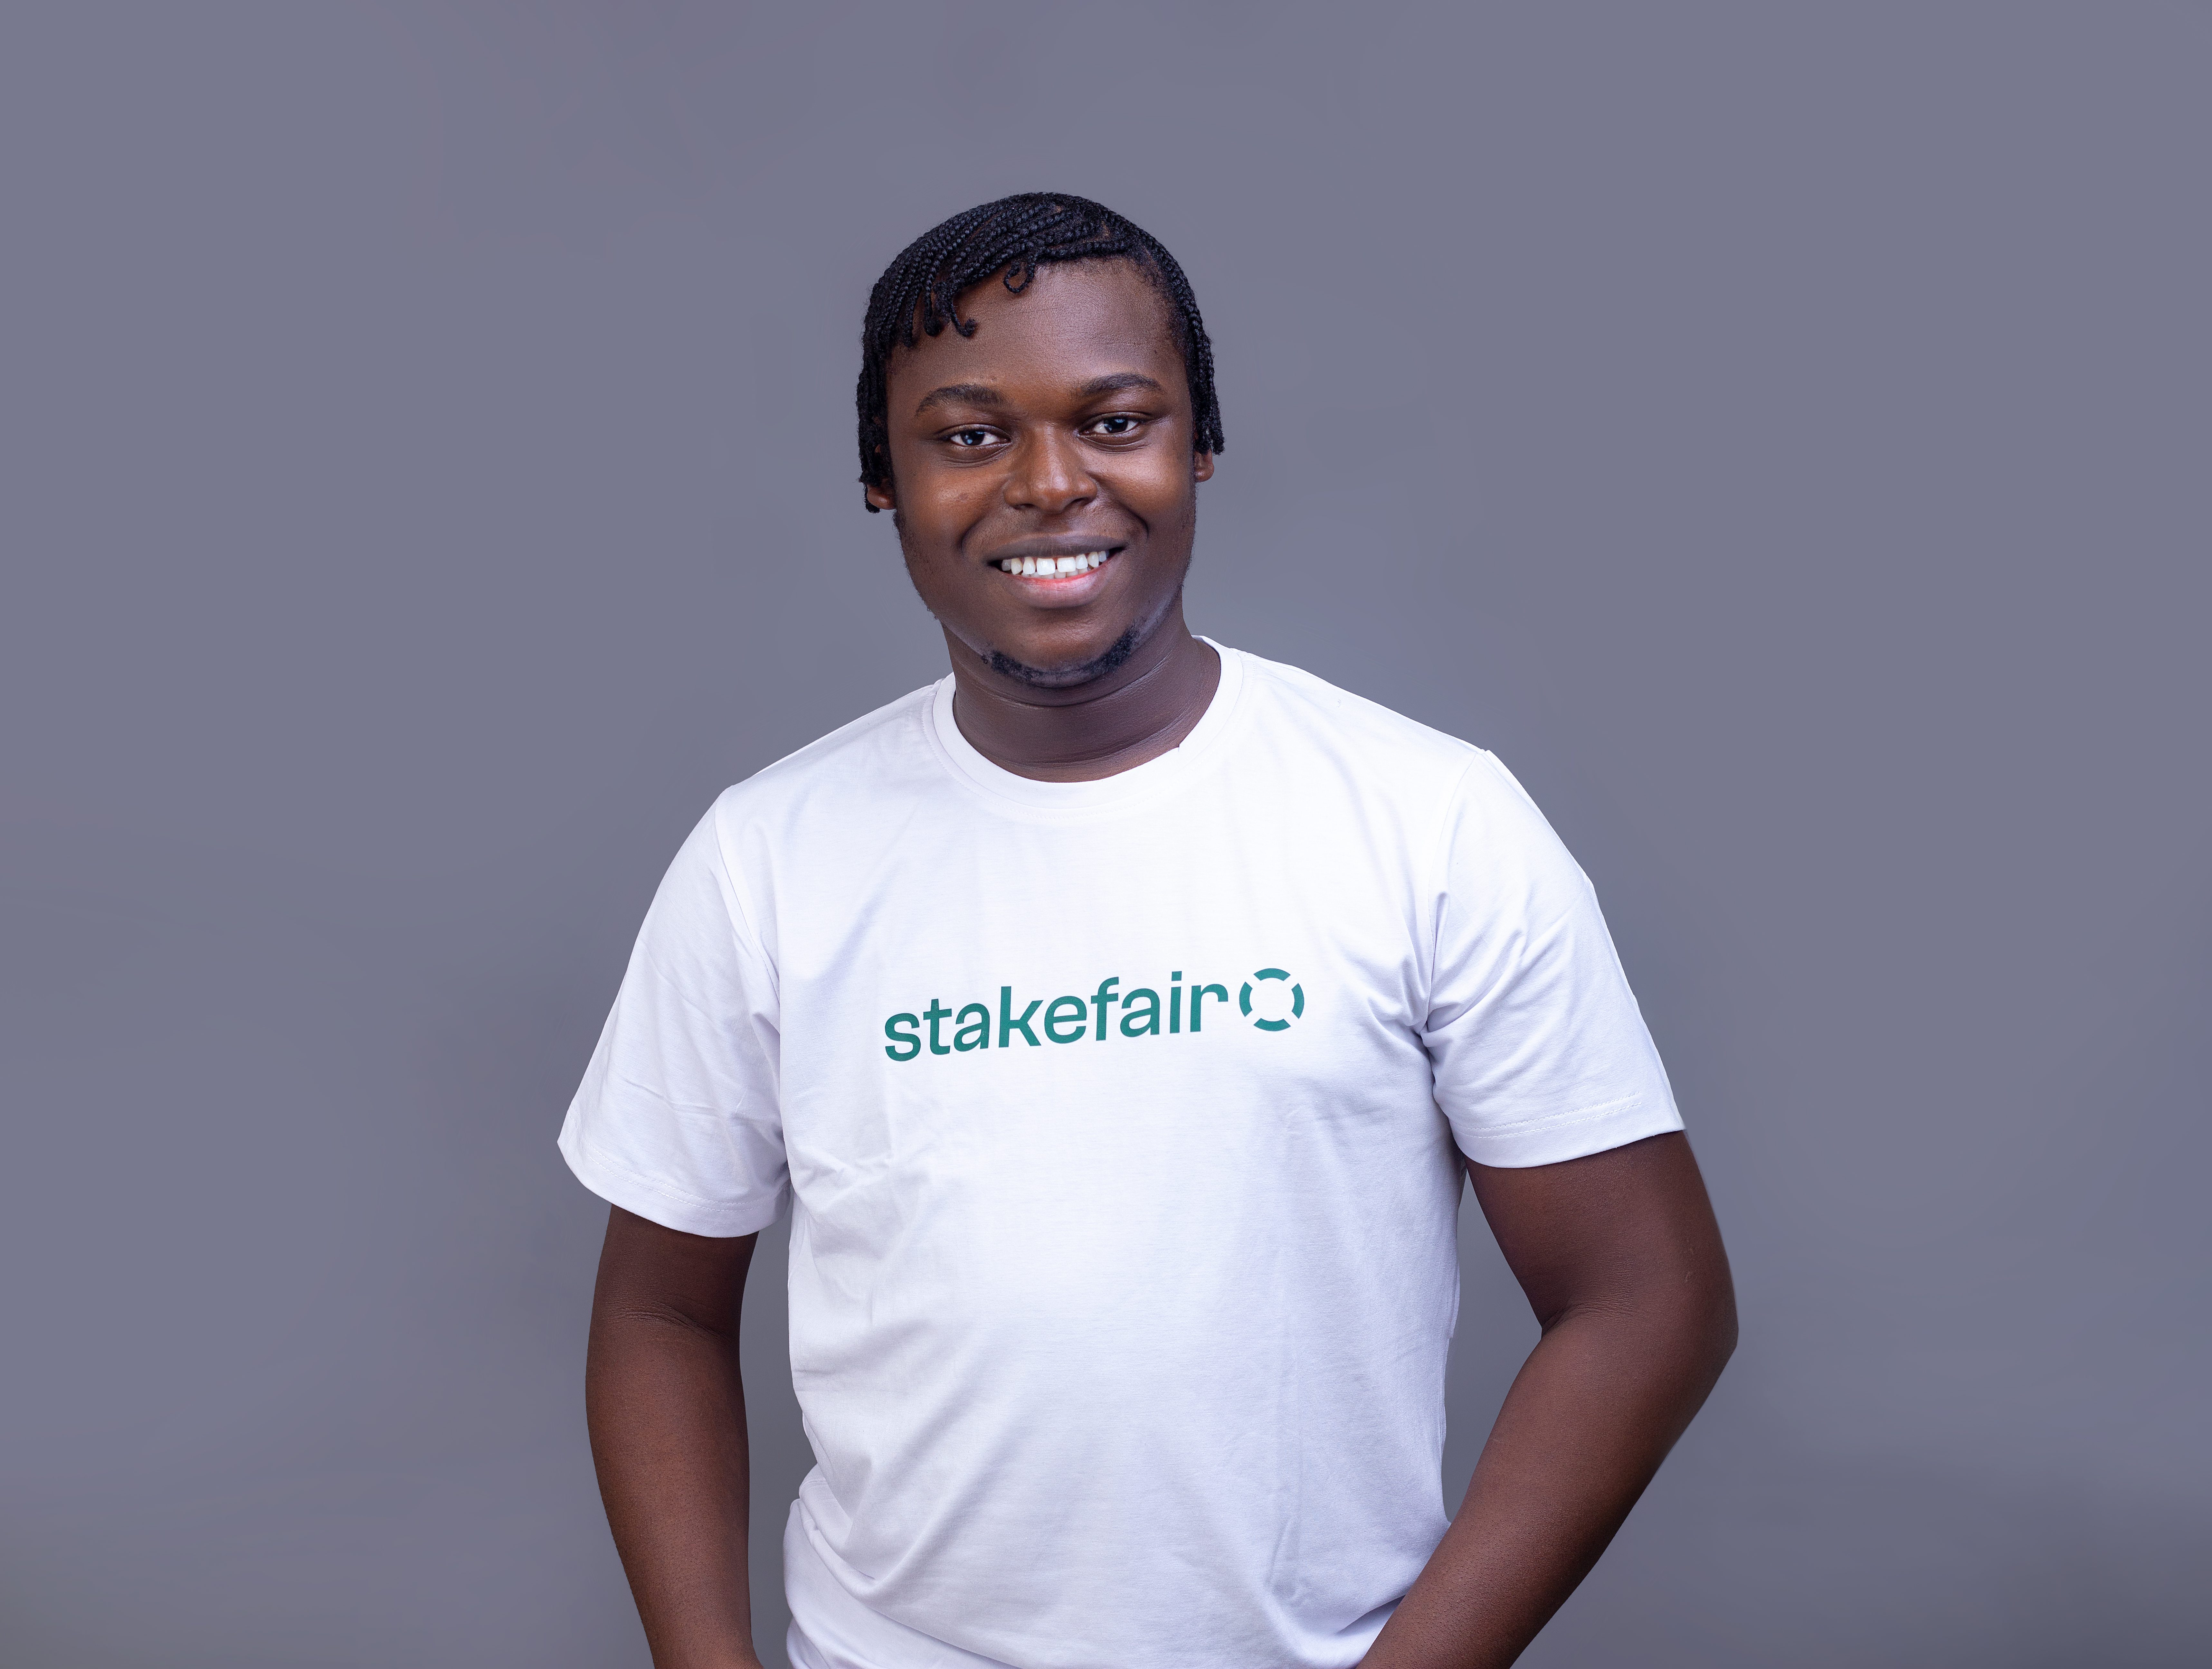 Stakefair founder and CEO